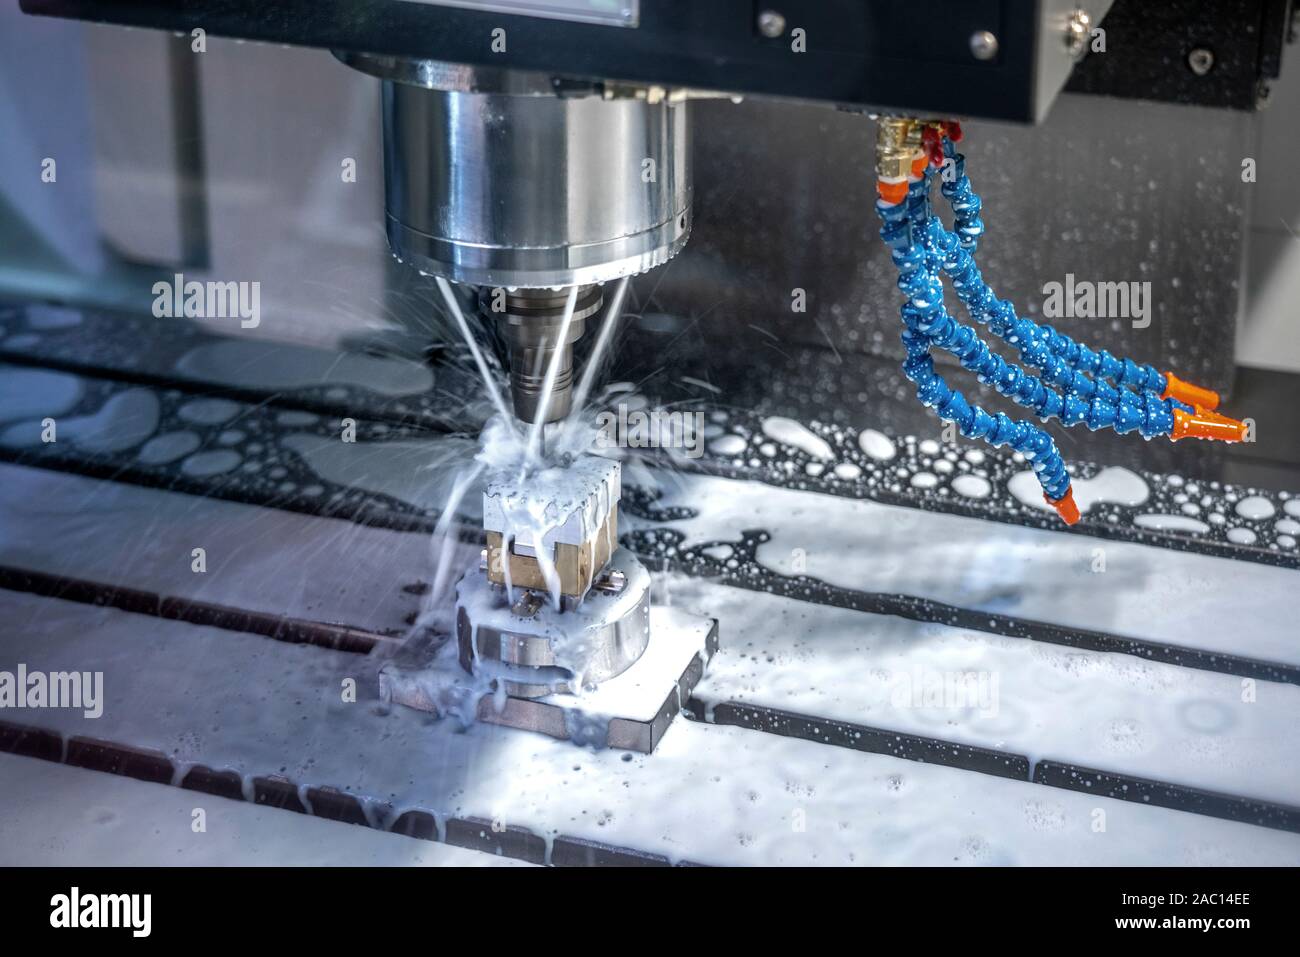 Industry milling mechanical turning metal working process metals parts ,Manufacturing industrial Stock Photo